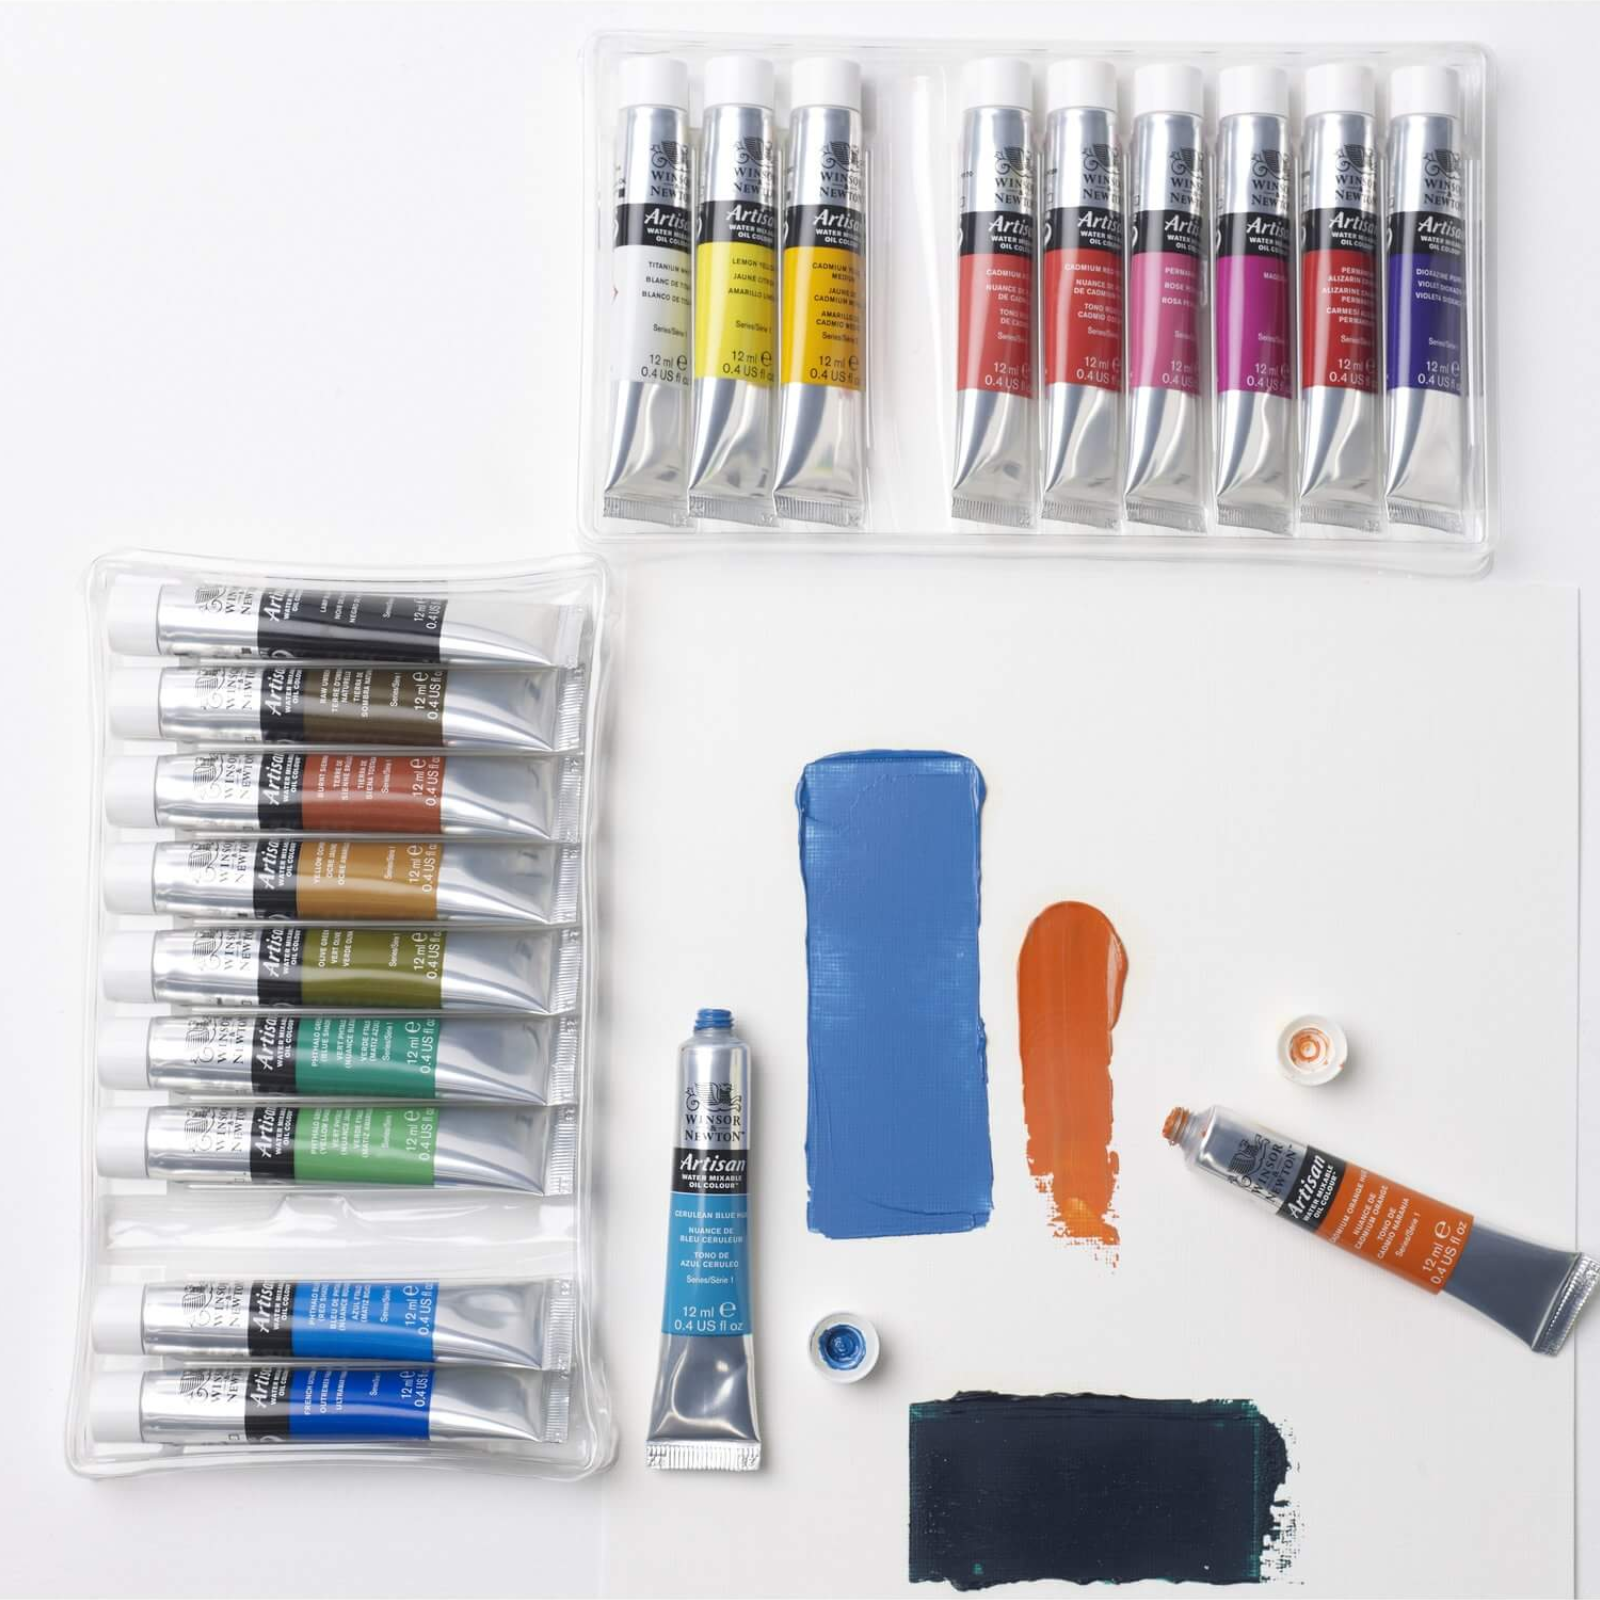 Winsor & Newton Artisan Water Mixable Oil Colour Set - Created to produce the same results as traditional oils